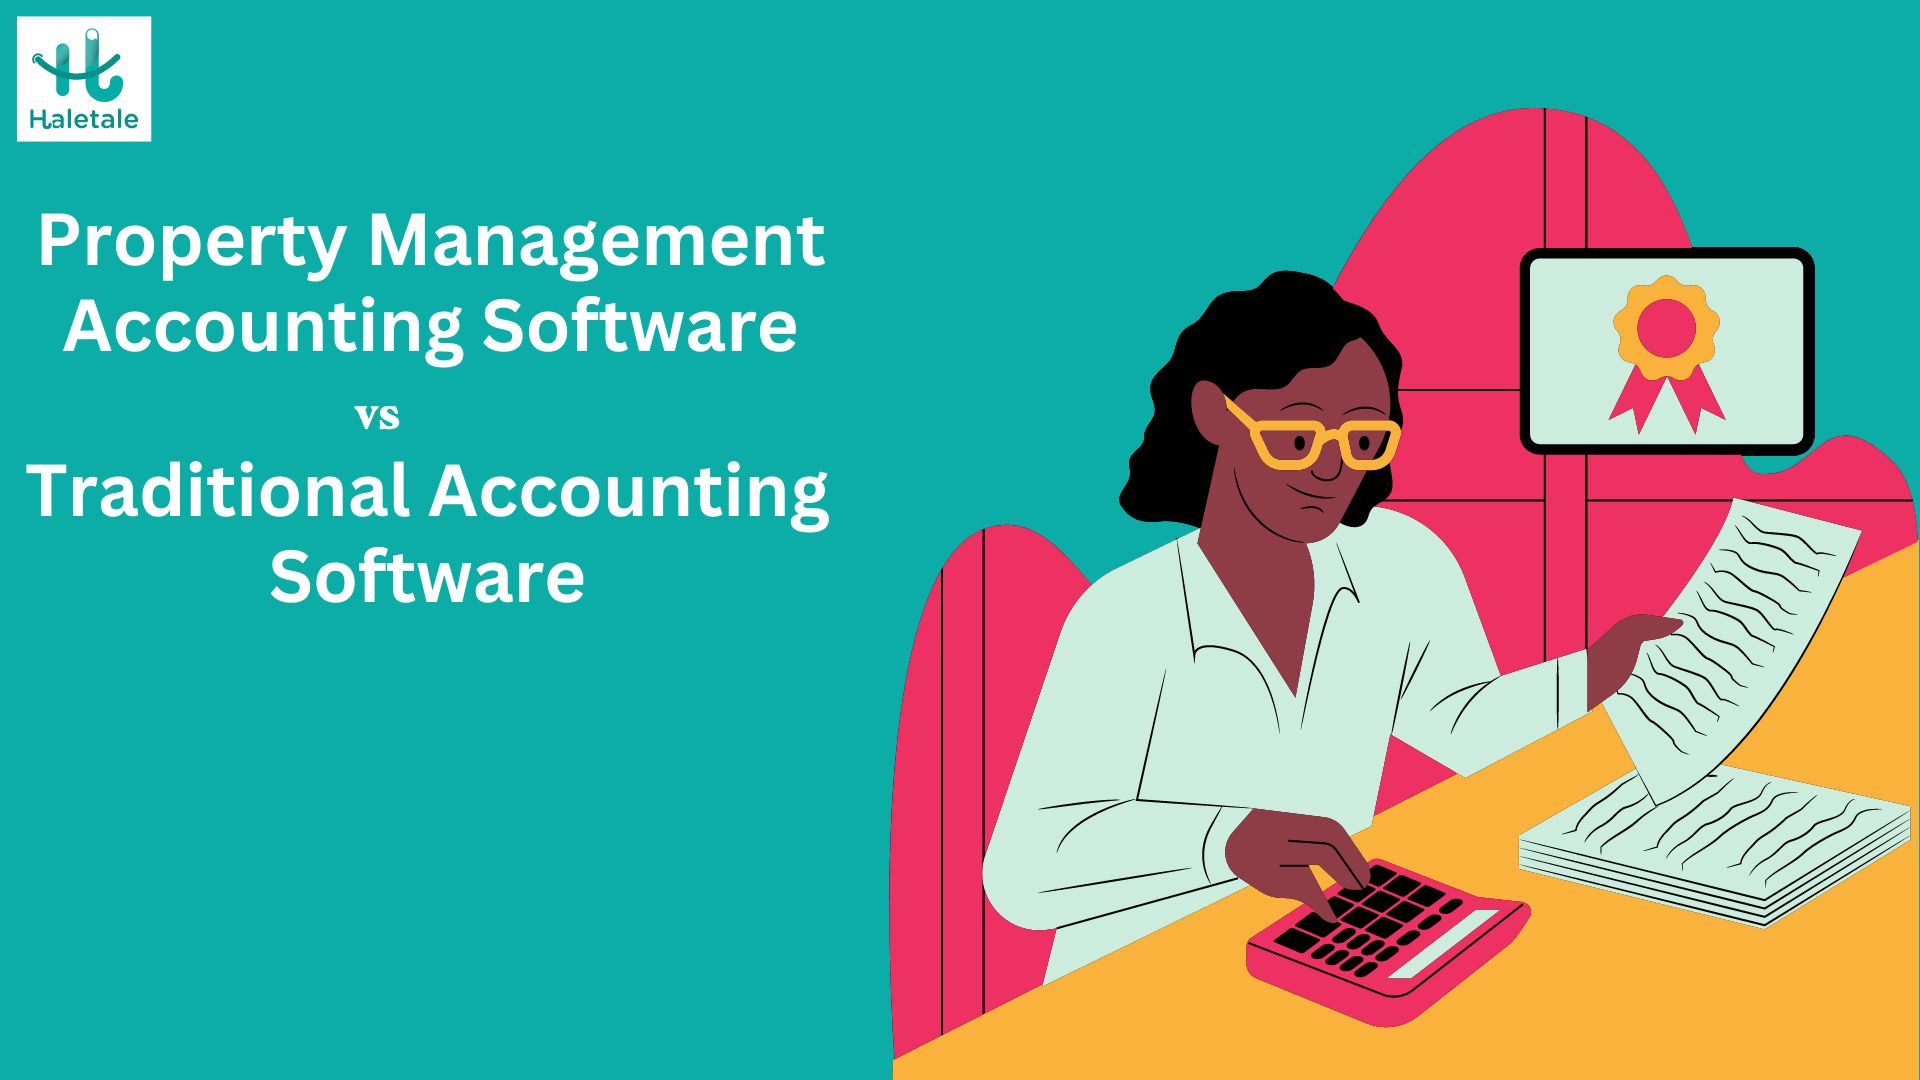 Property Management Accounting Software vs Traditional Accounting Software